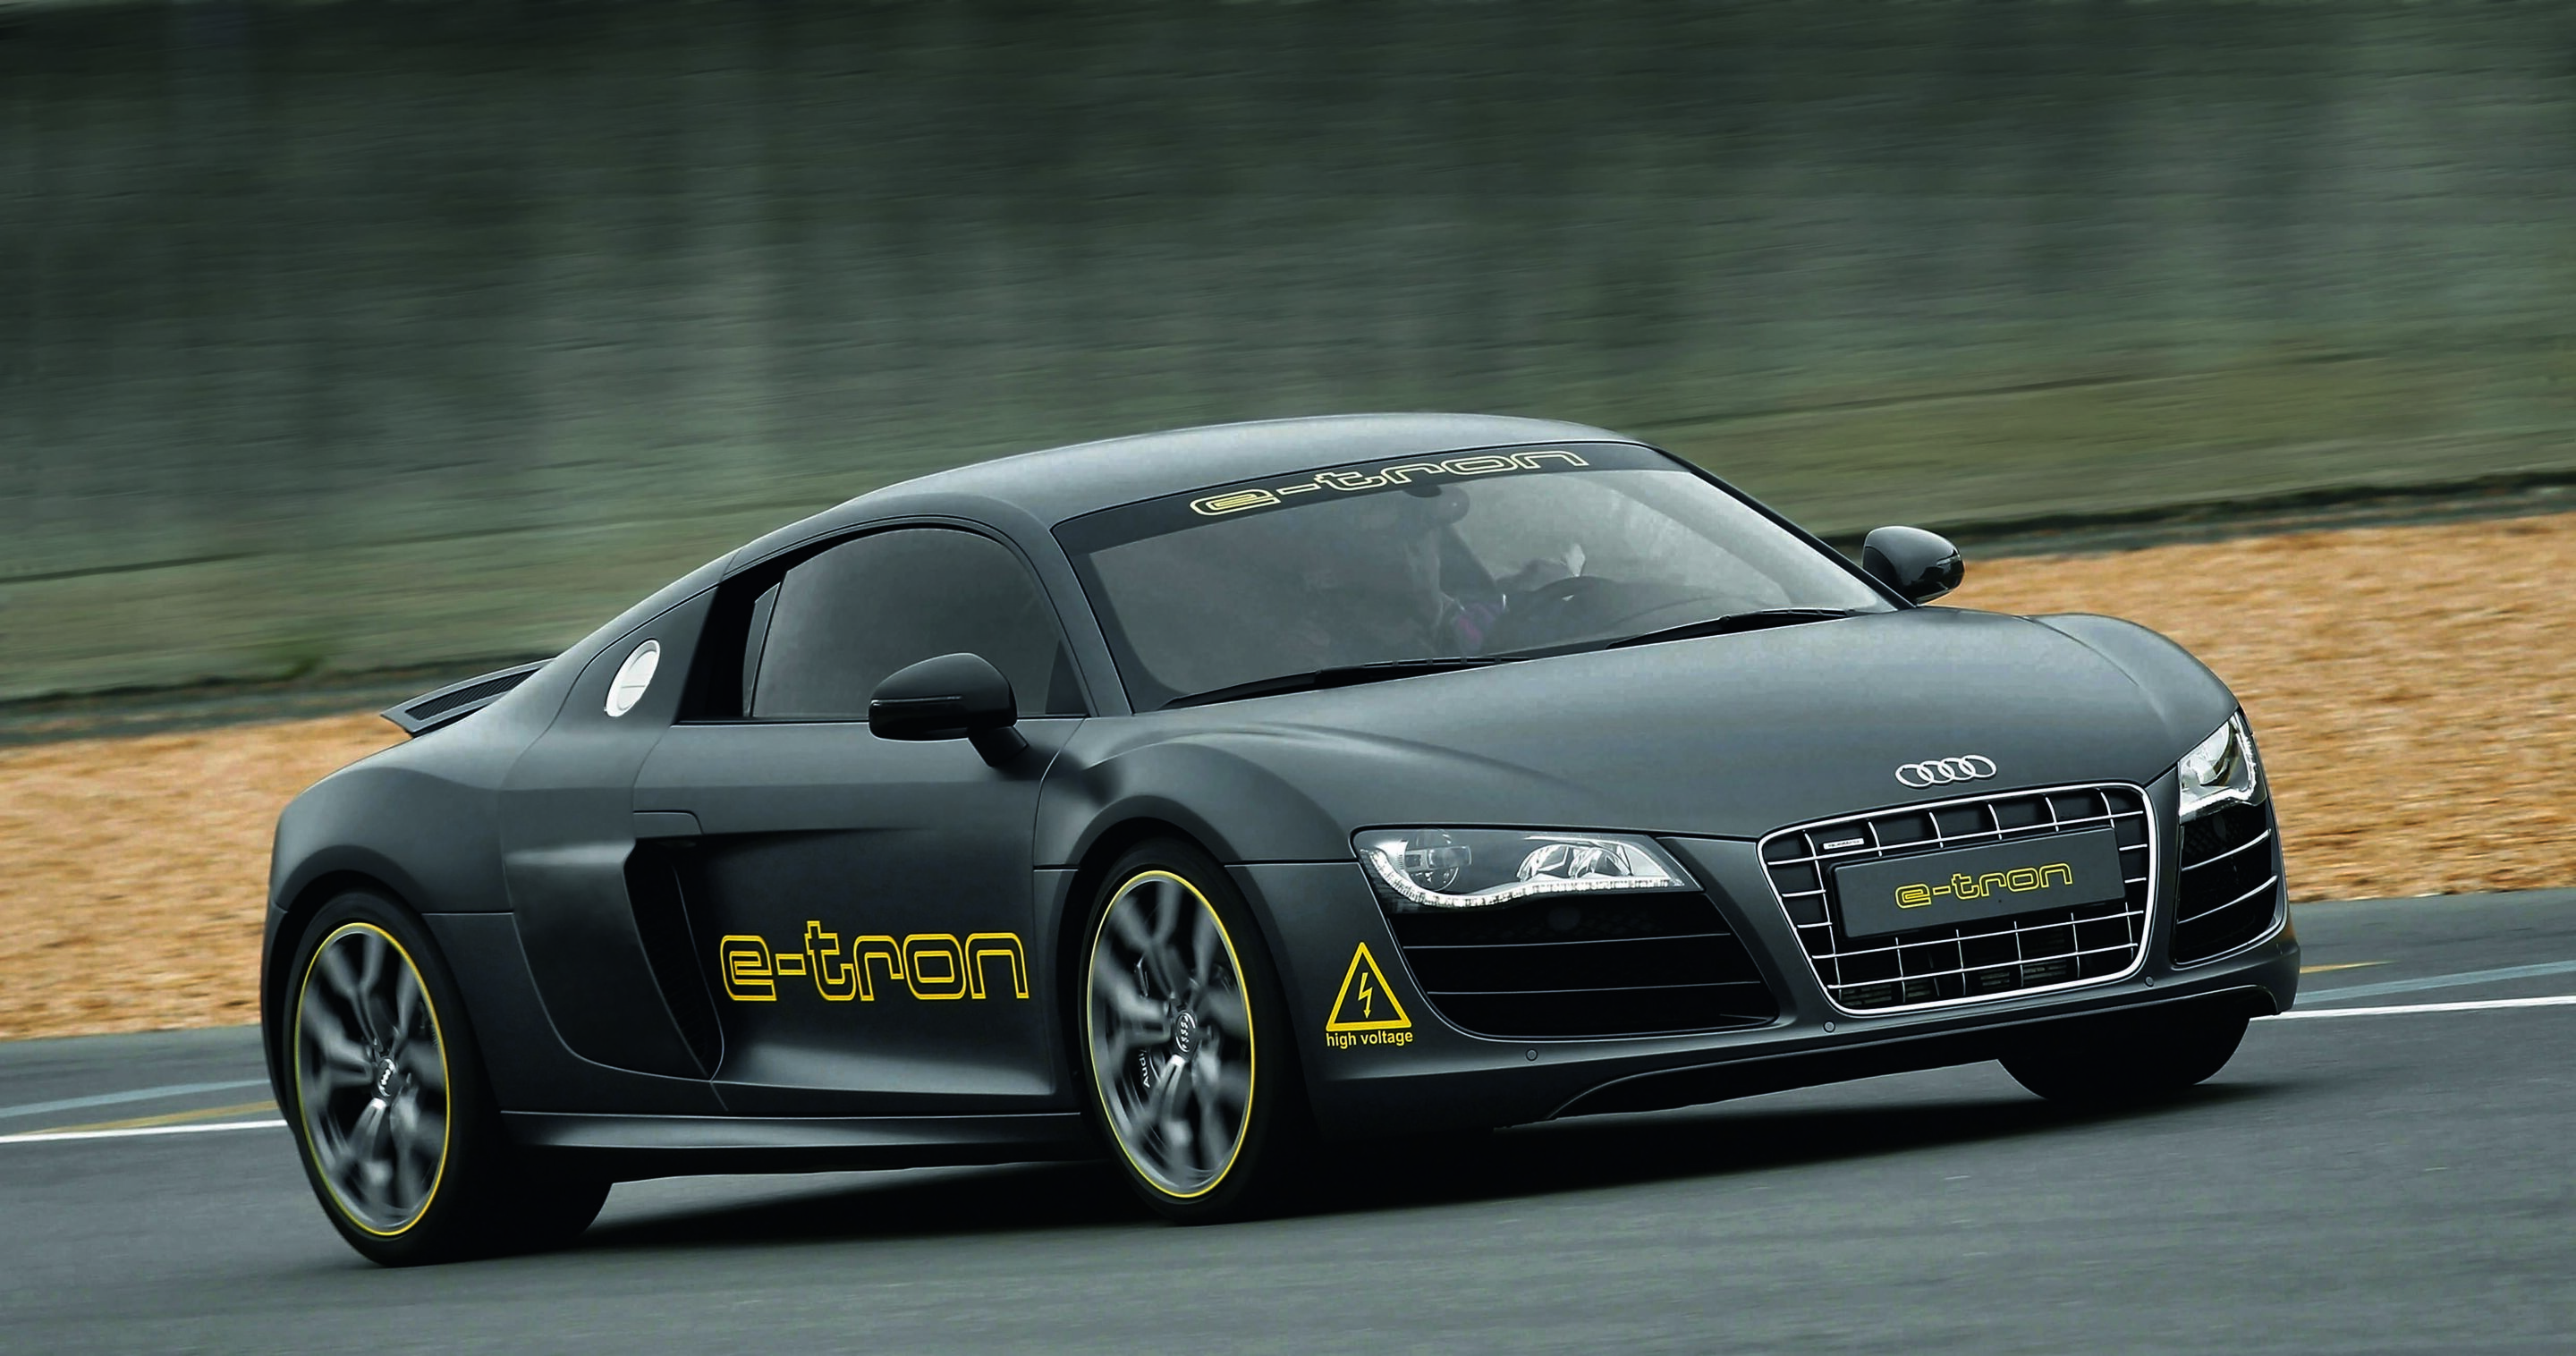 Audi has entered an e-tron technology platform wrapped in the skin of an R8 in the Silvretta E-Auto Rally Montafon 2010.